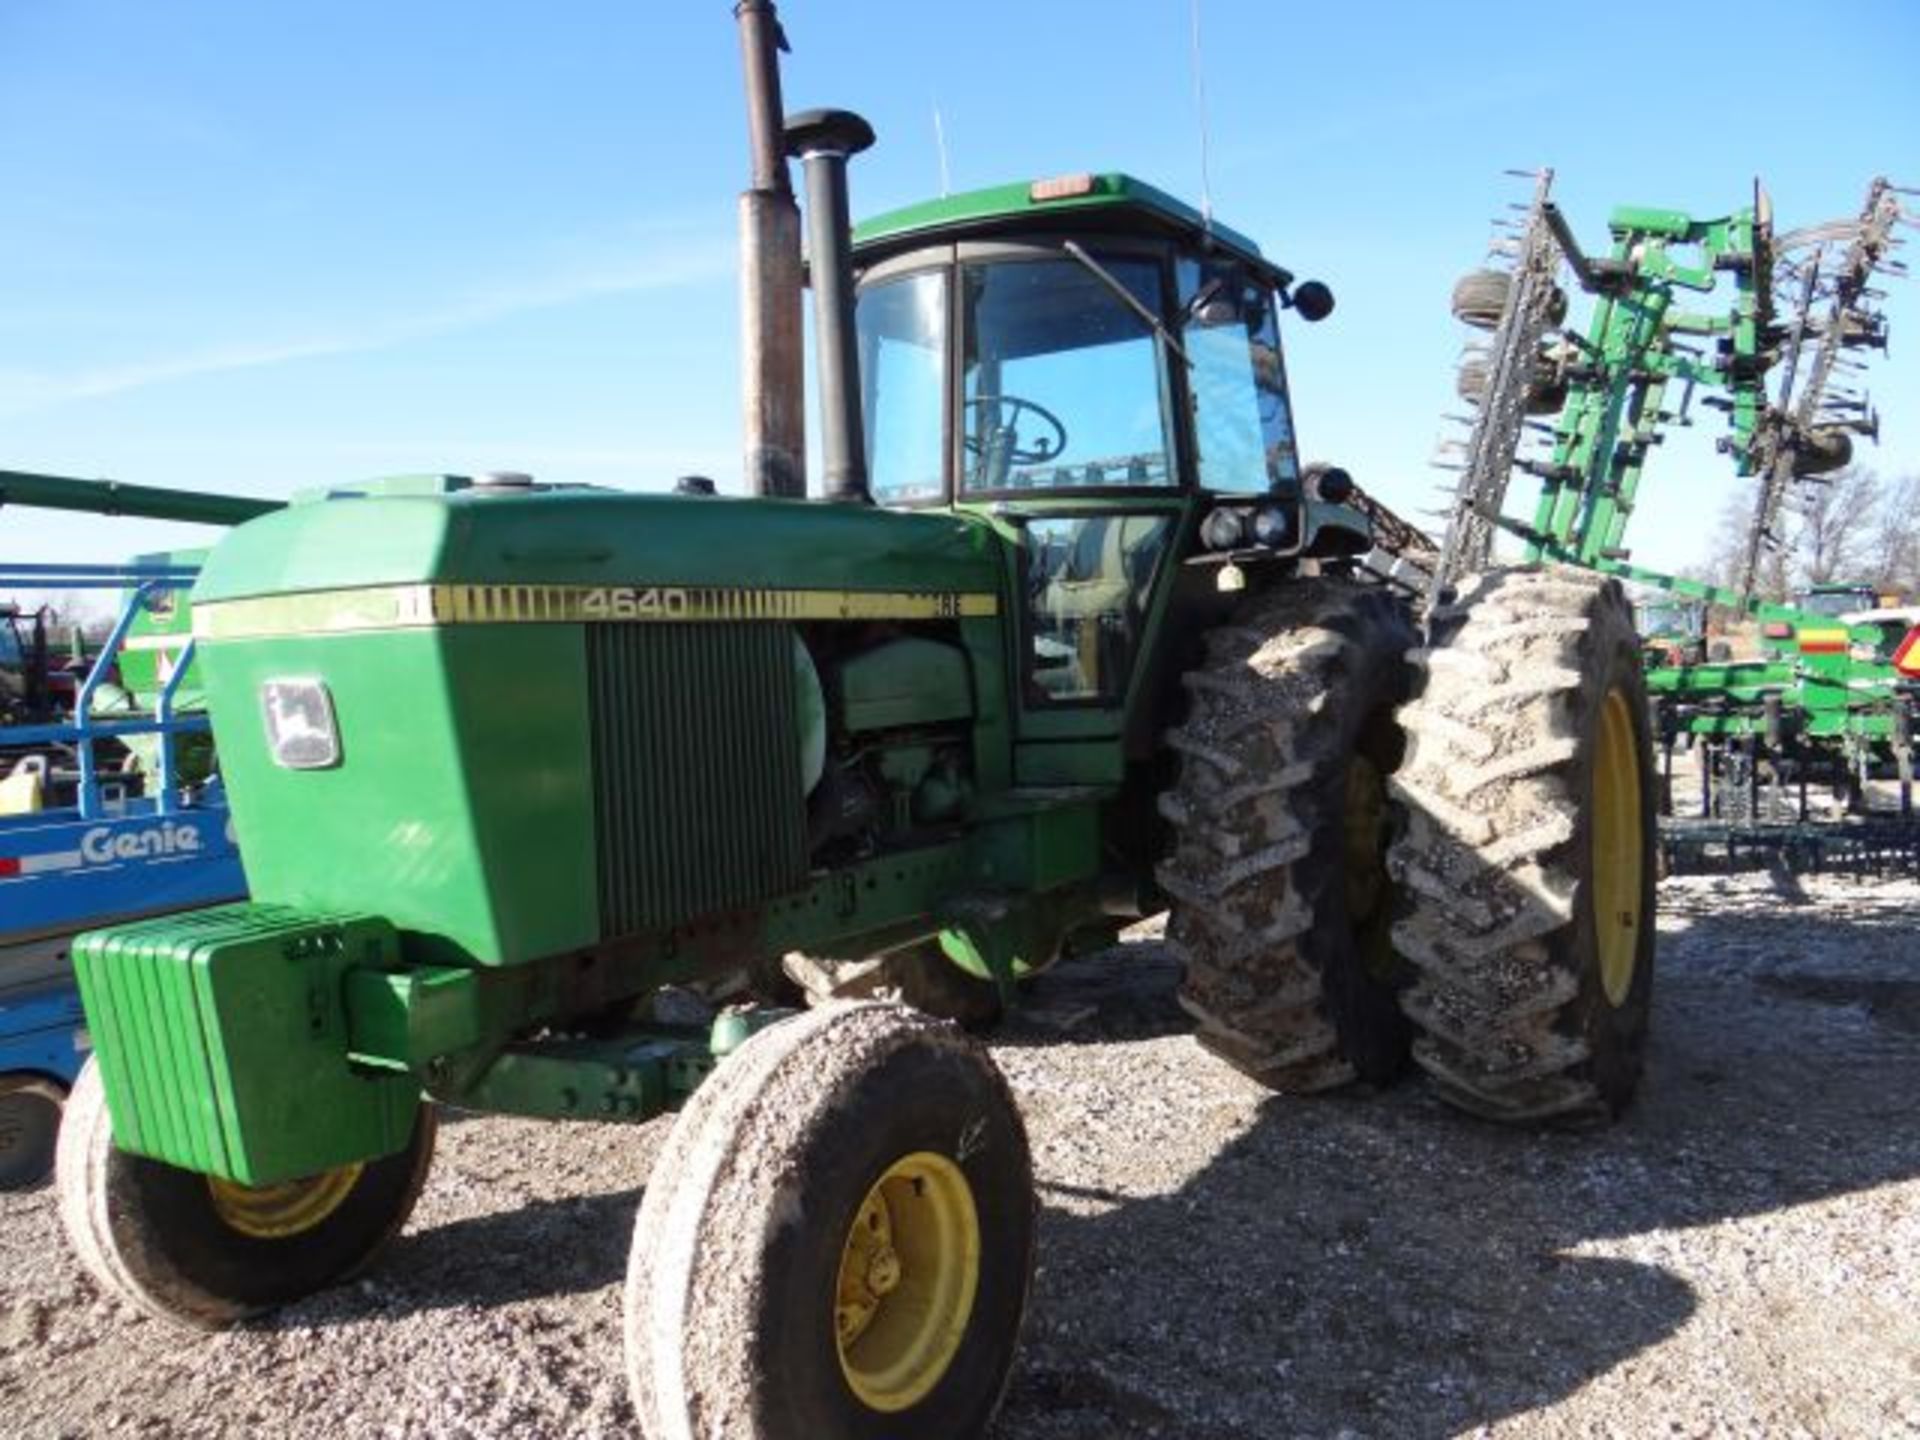 JD 4640 Tractor, 1978 8200 hrs, 2wd, 1000 PTO, Quad Range, 3 SCVs, QH, 20.8x38 Duals, Front Weights